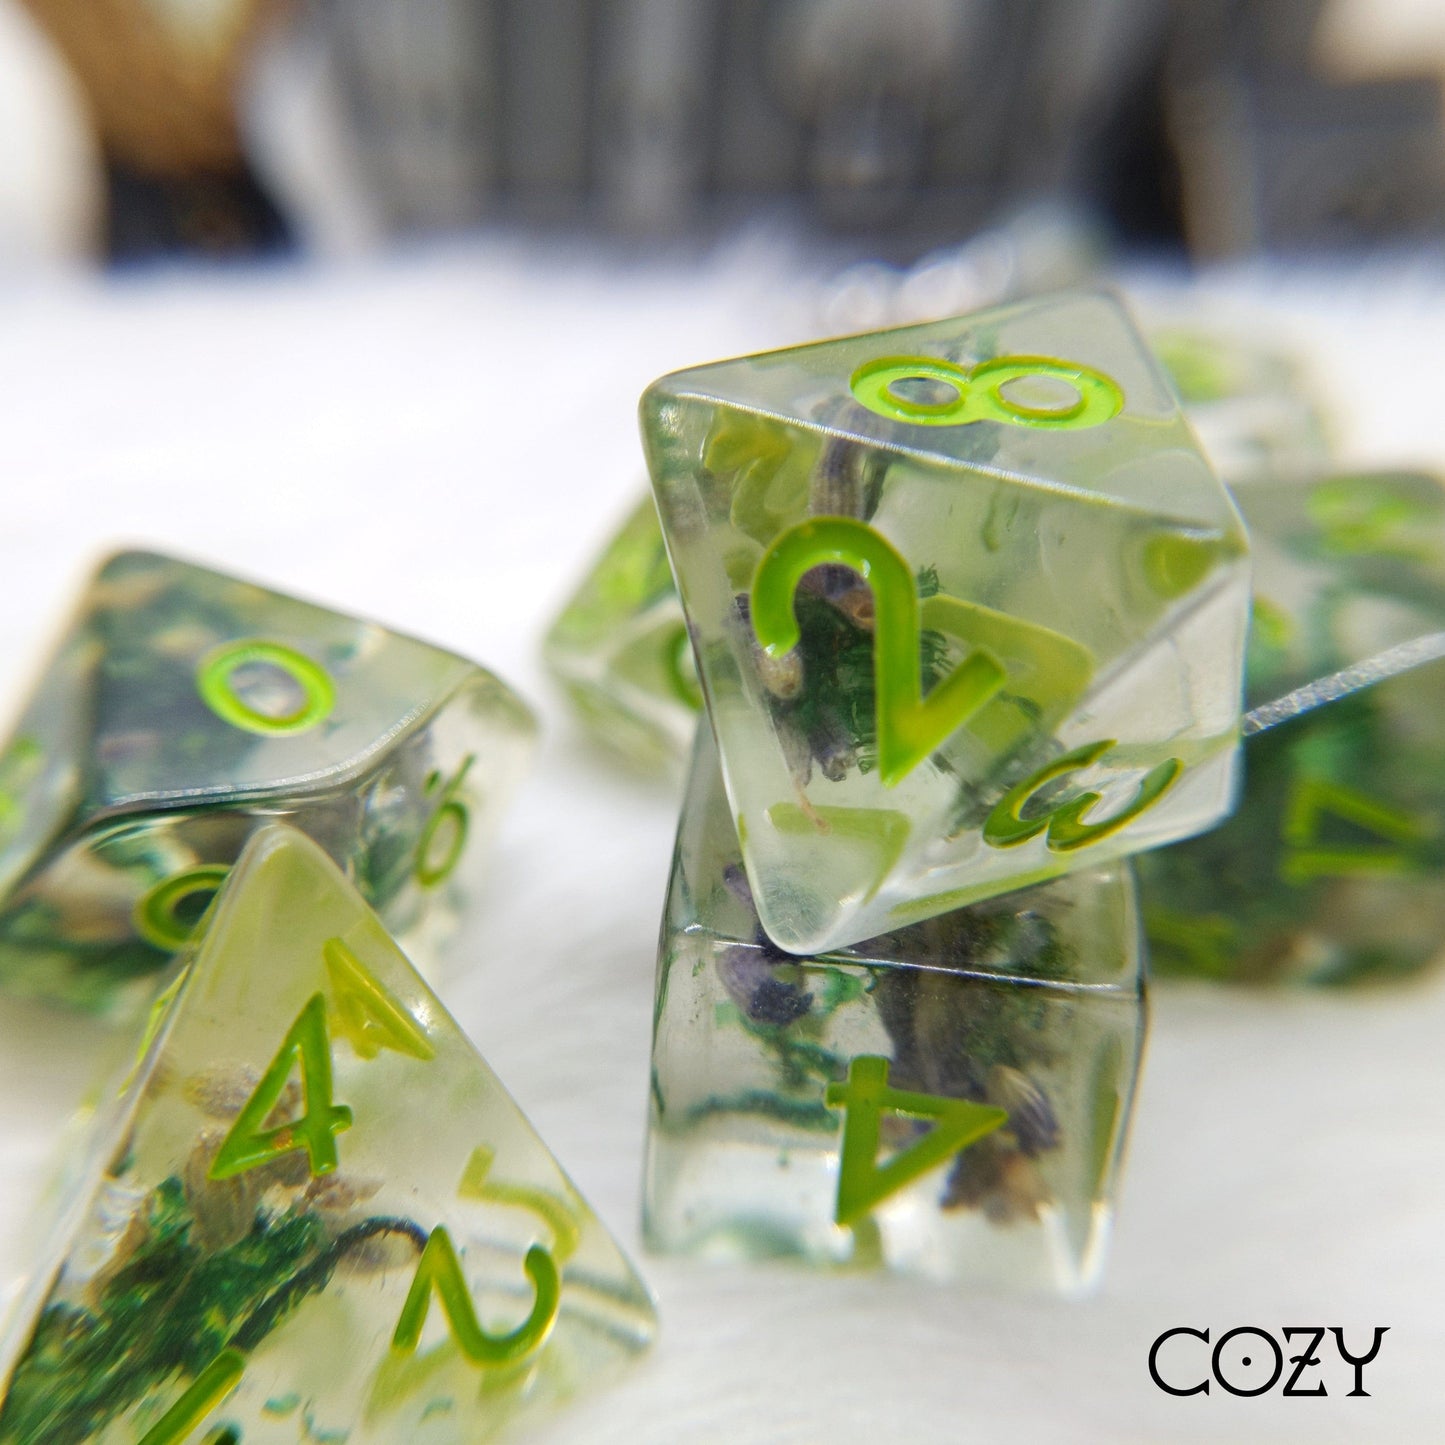 Moss and Lavender Dice Set. Real Dried Plants in Clear Resin